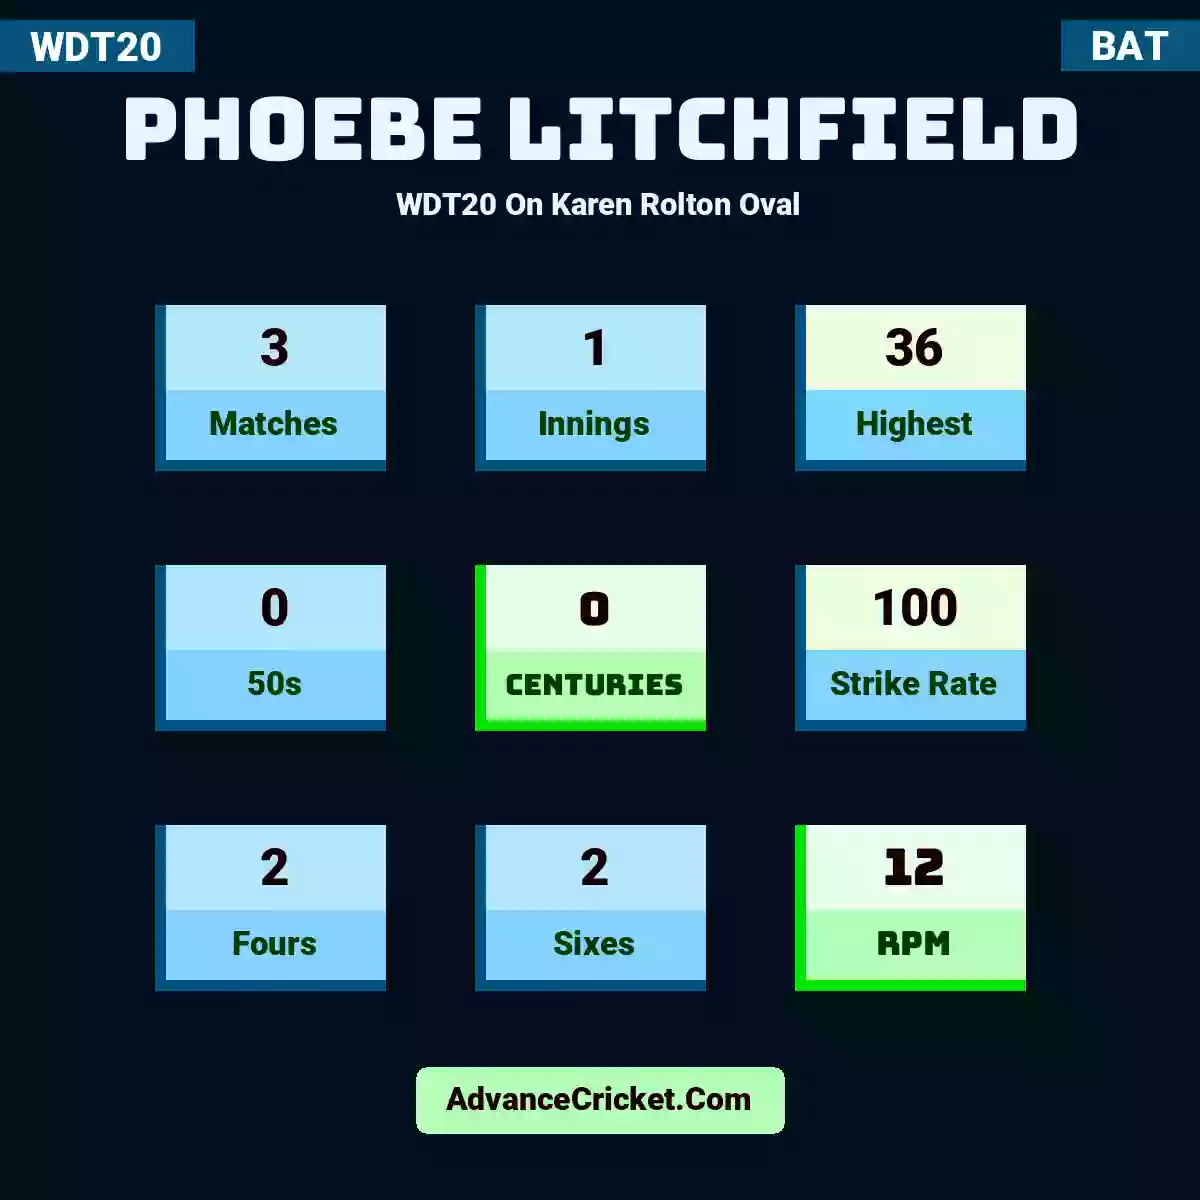 Phoebe Litchfield WDT20  On Karen Rolton Oval, Phoebe Litchfield played 3 matches, scored 36 runs as highest, 0 half-centuries, and 0 centuries, with a strike rate of 100. P.Litchfield hit 2 fours and 2 sixes, with an RPM of 12.